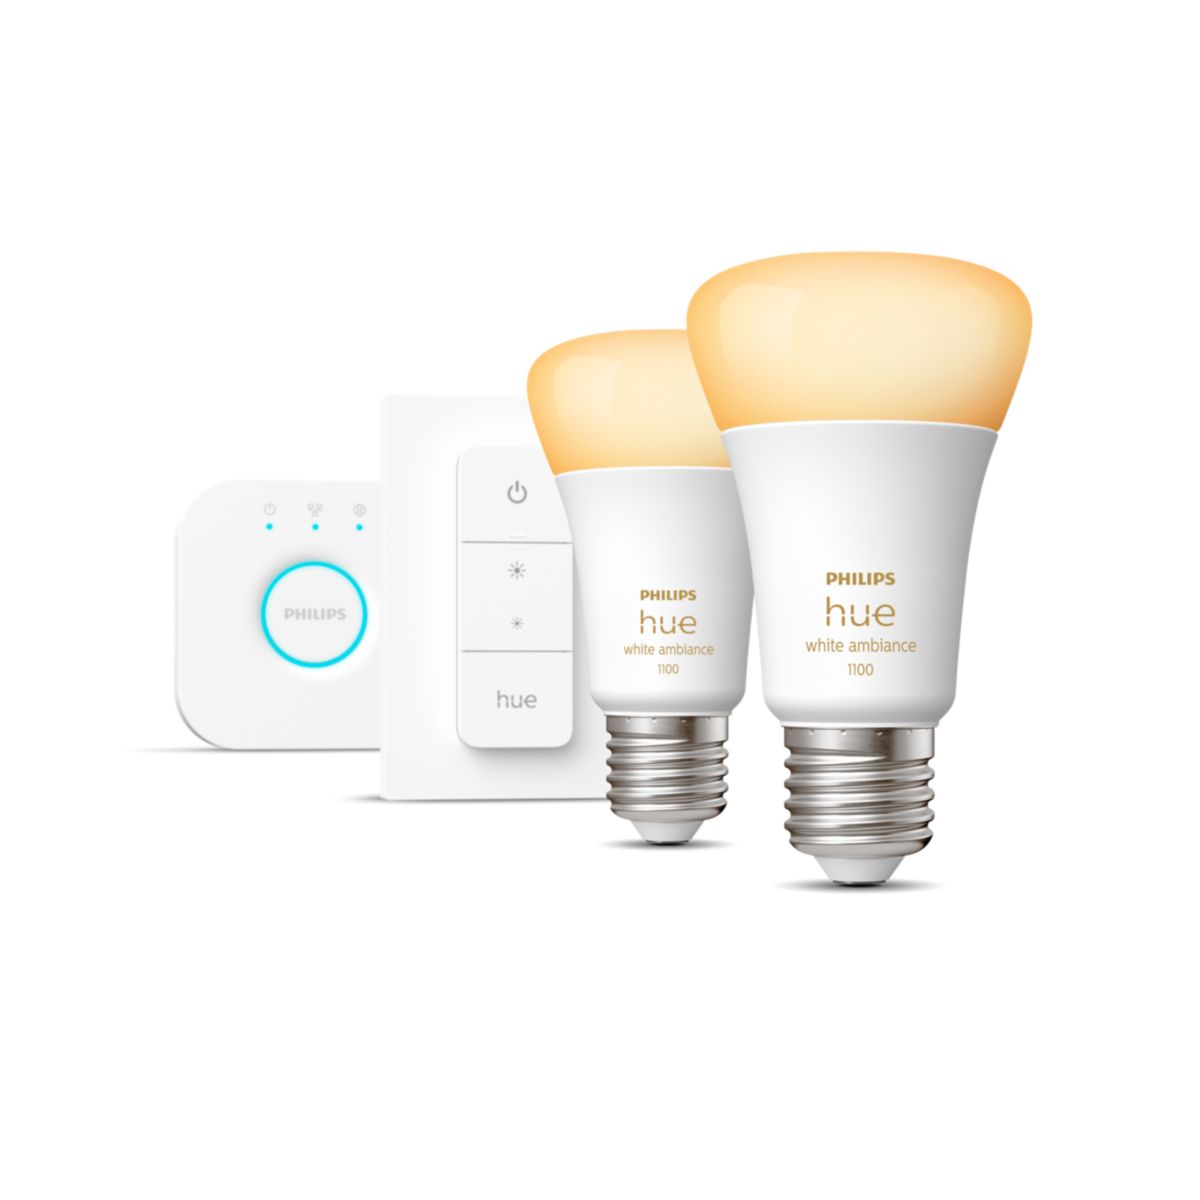 Philips Hue starterkit e27 white ambiance 1100lm 2x + dimmer switch